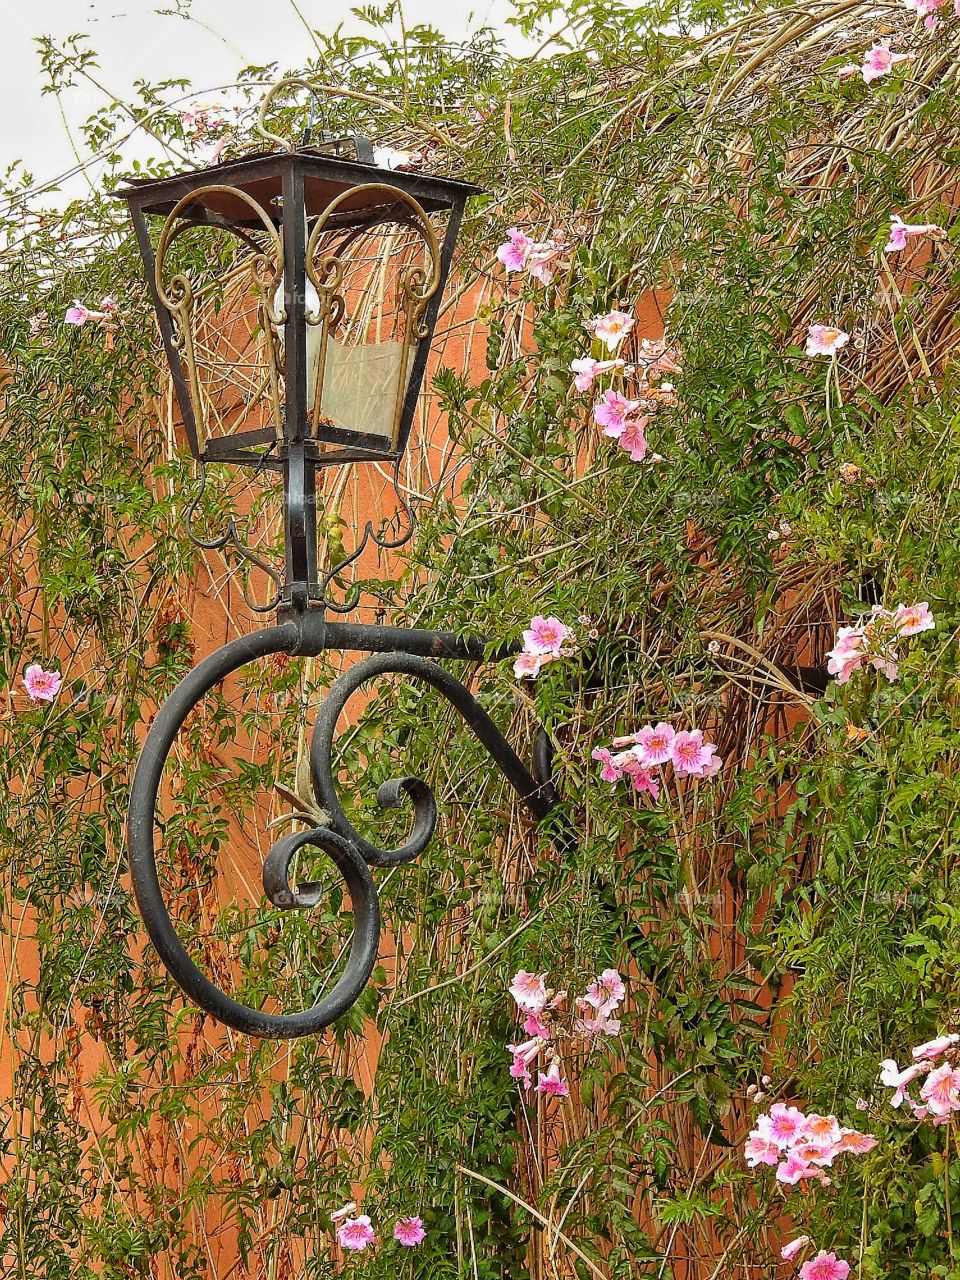 Lamp surrounded by flowers